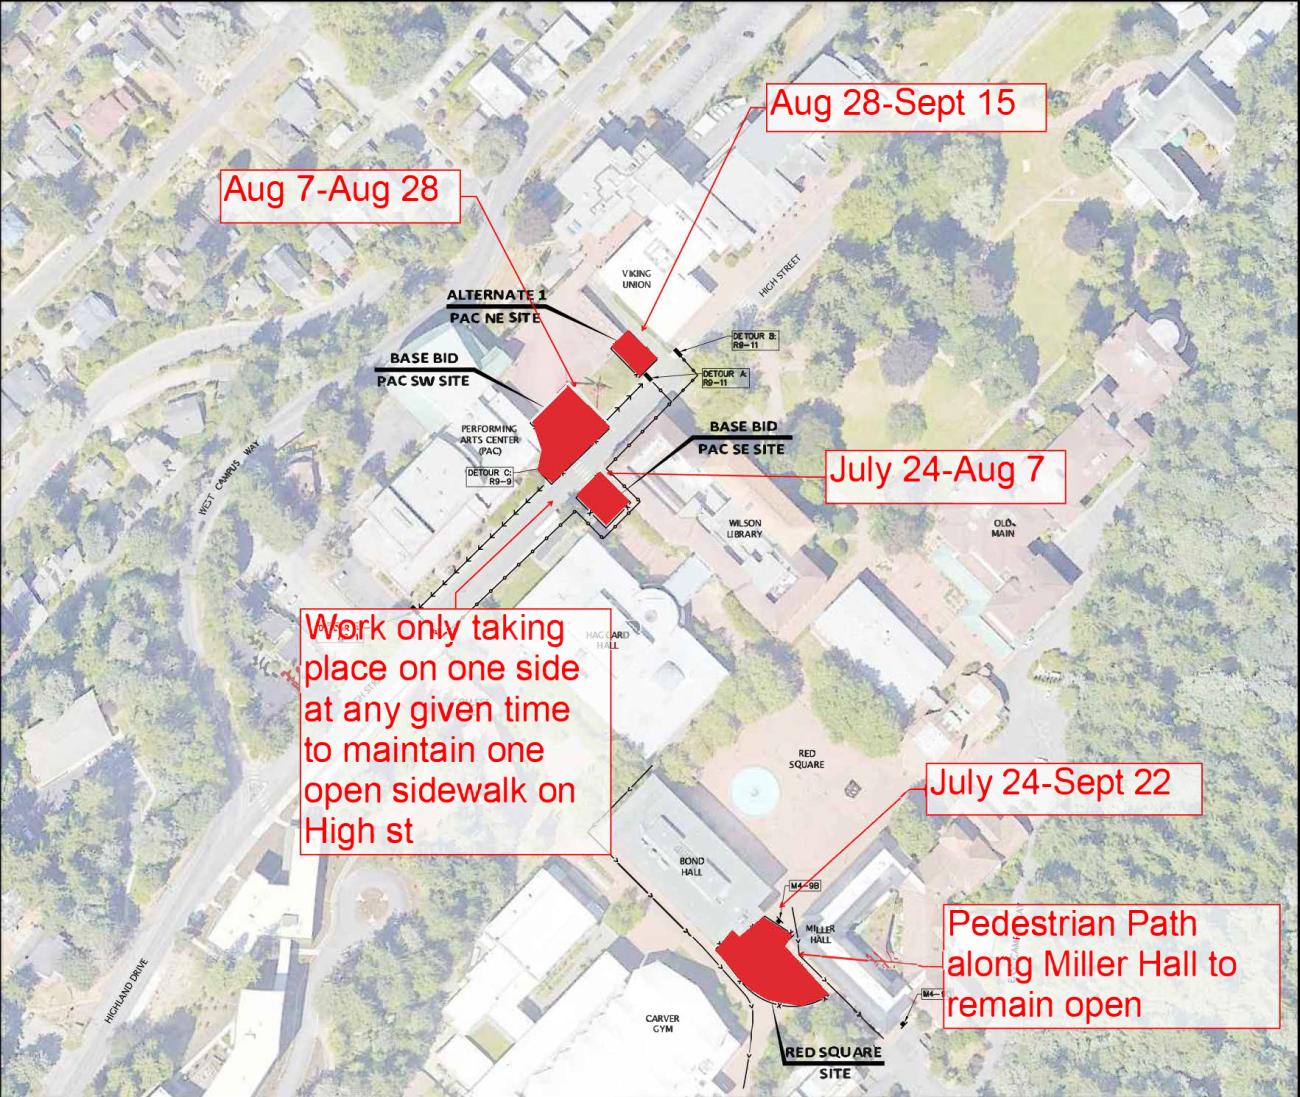 Map showing campus walkways work areas and dates as described above